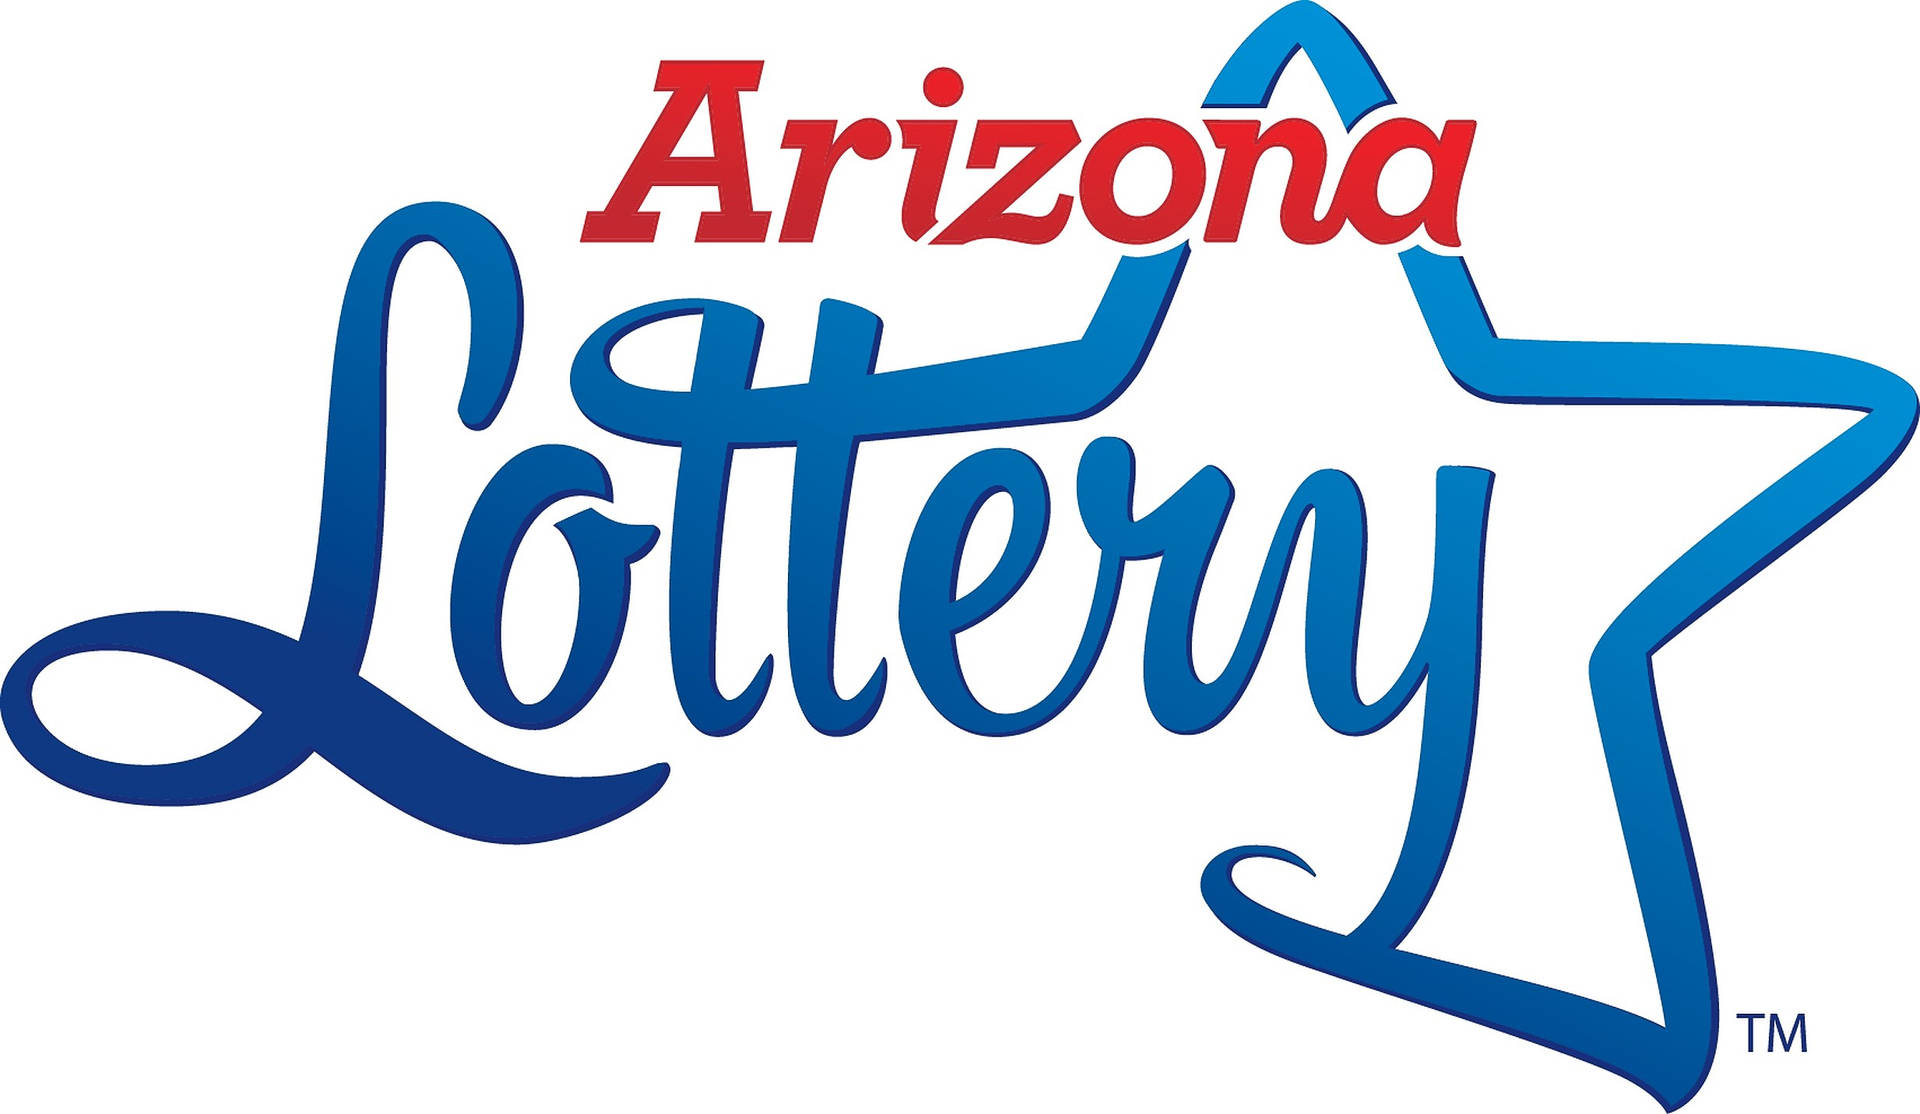 Exciting Arizona Lottery Banner